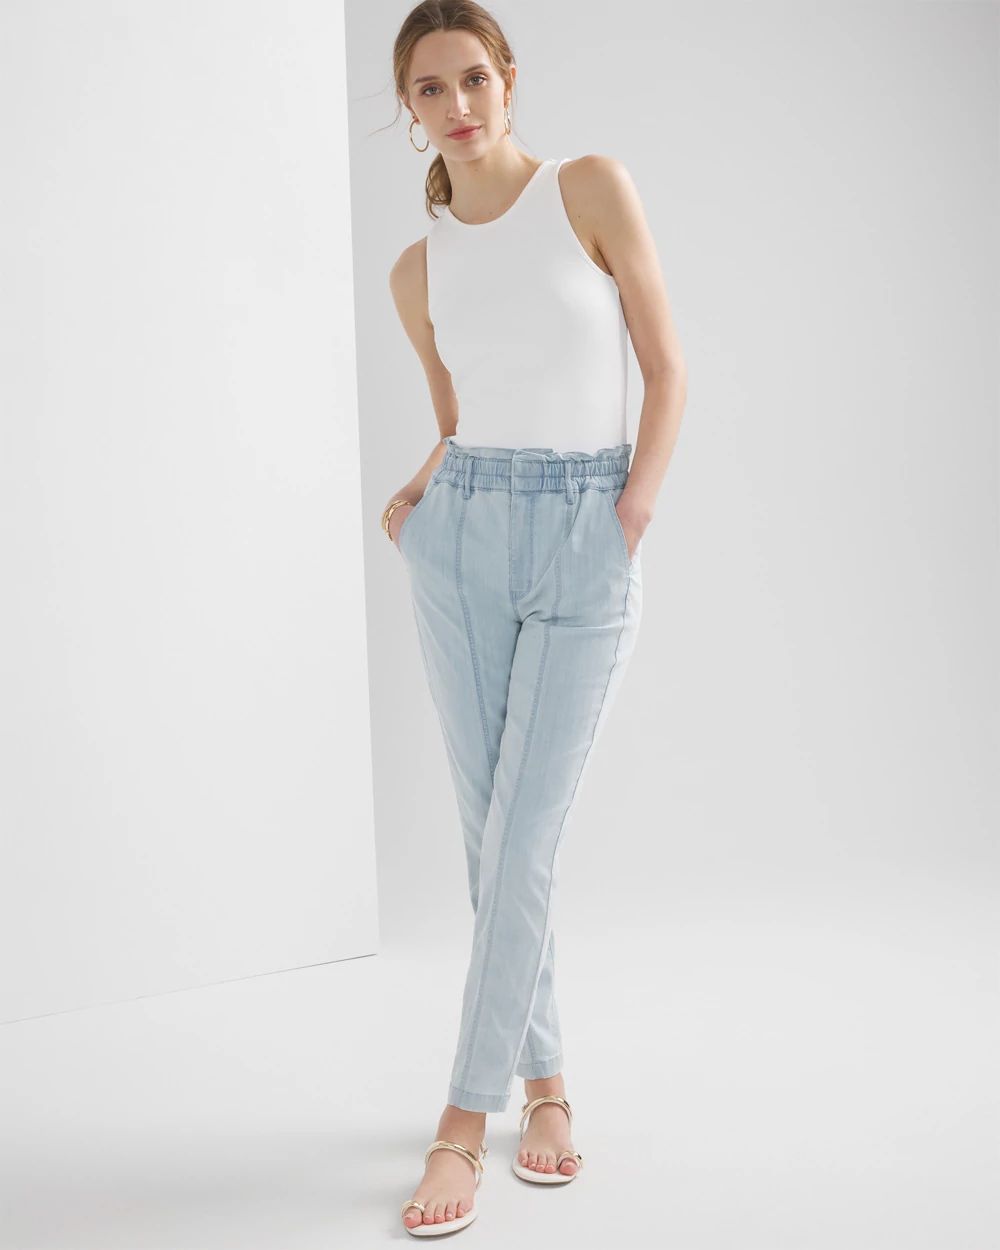 Extra High-Rise Tapered Ankle Jean click to view larger image.